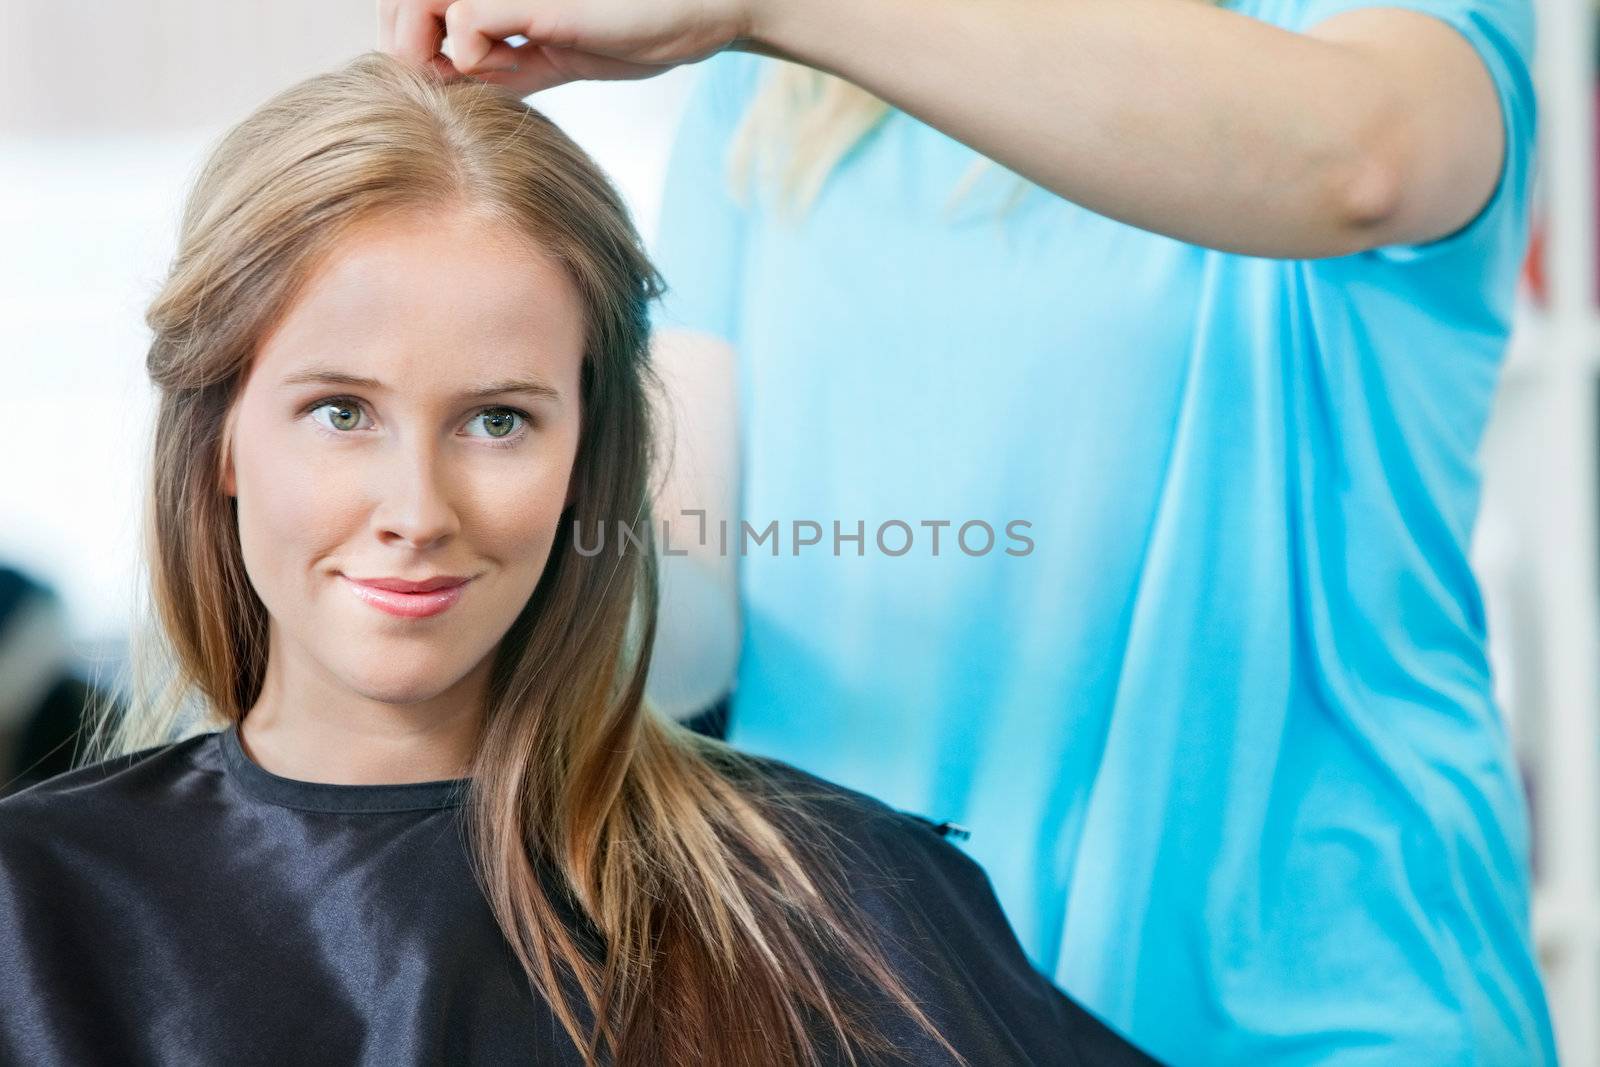 Young woman smiling while hairdresser getting her ready for haircut at parlor